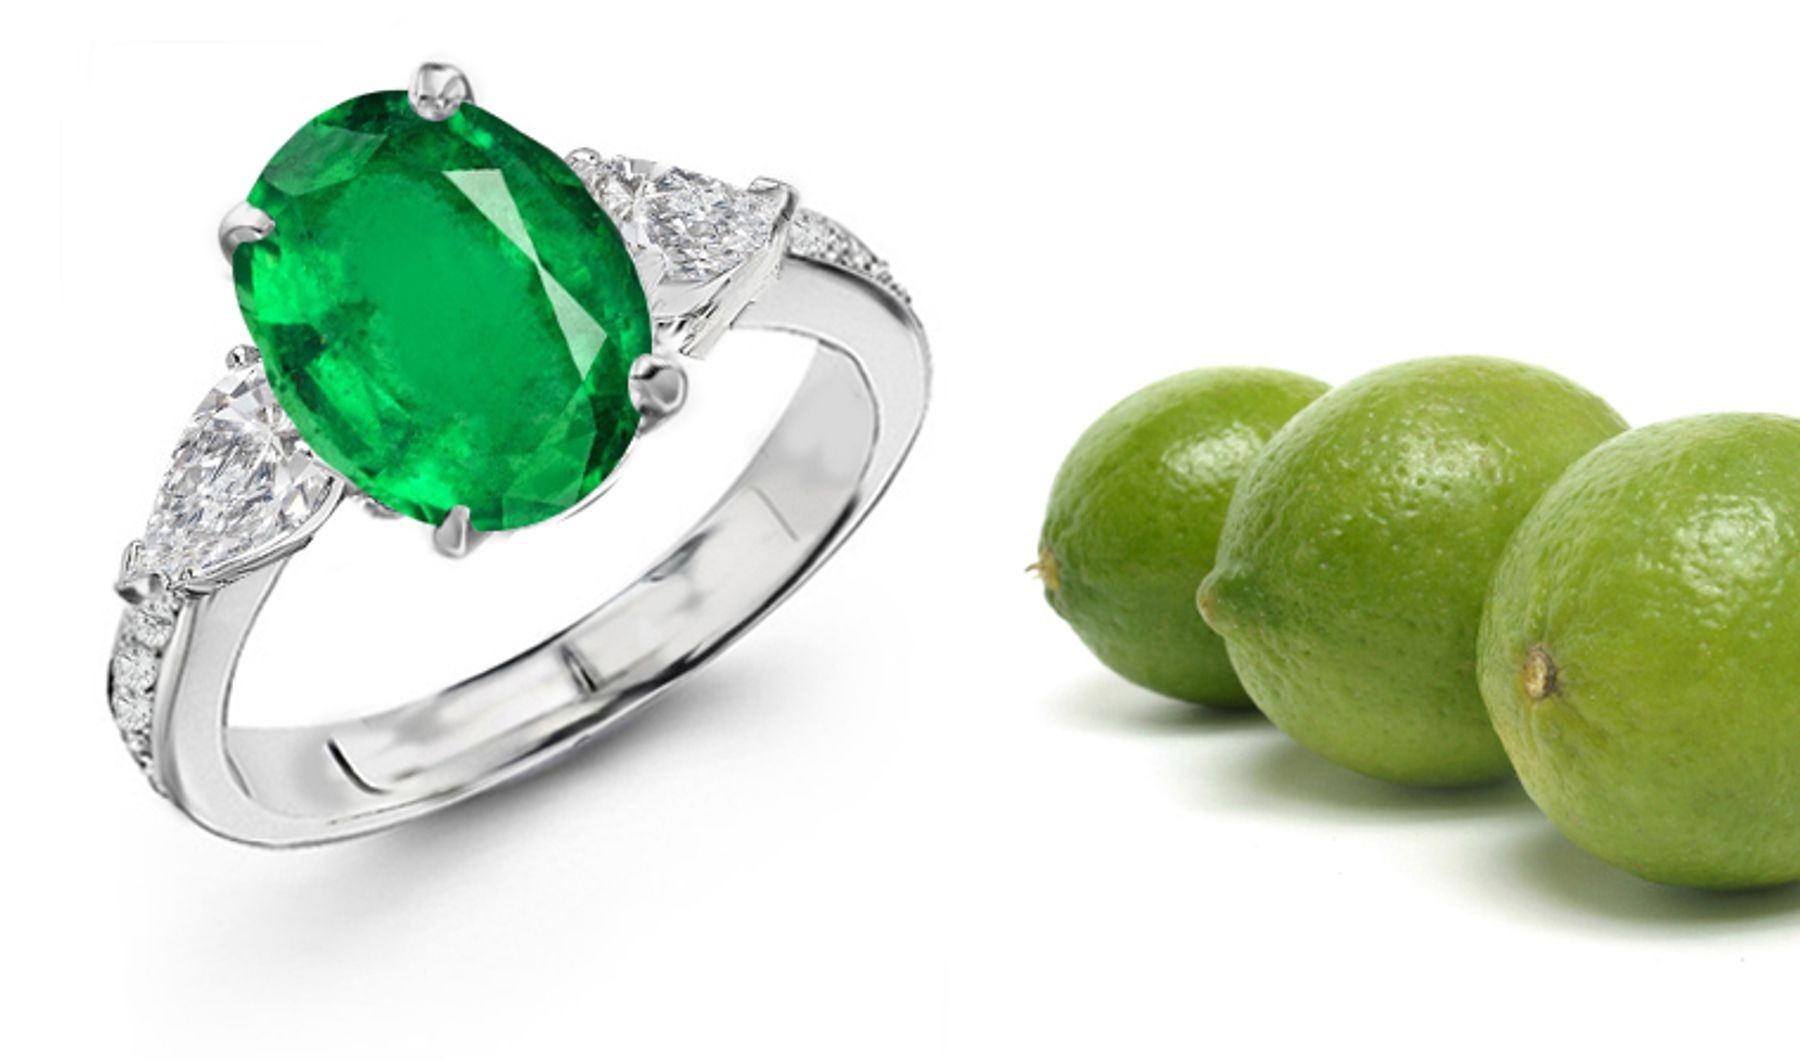 Three Stone Diamond Rings Features Center Oval Cut Emerald, and pear-shaped side stones